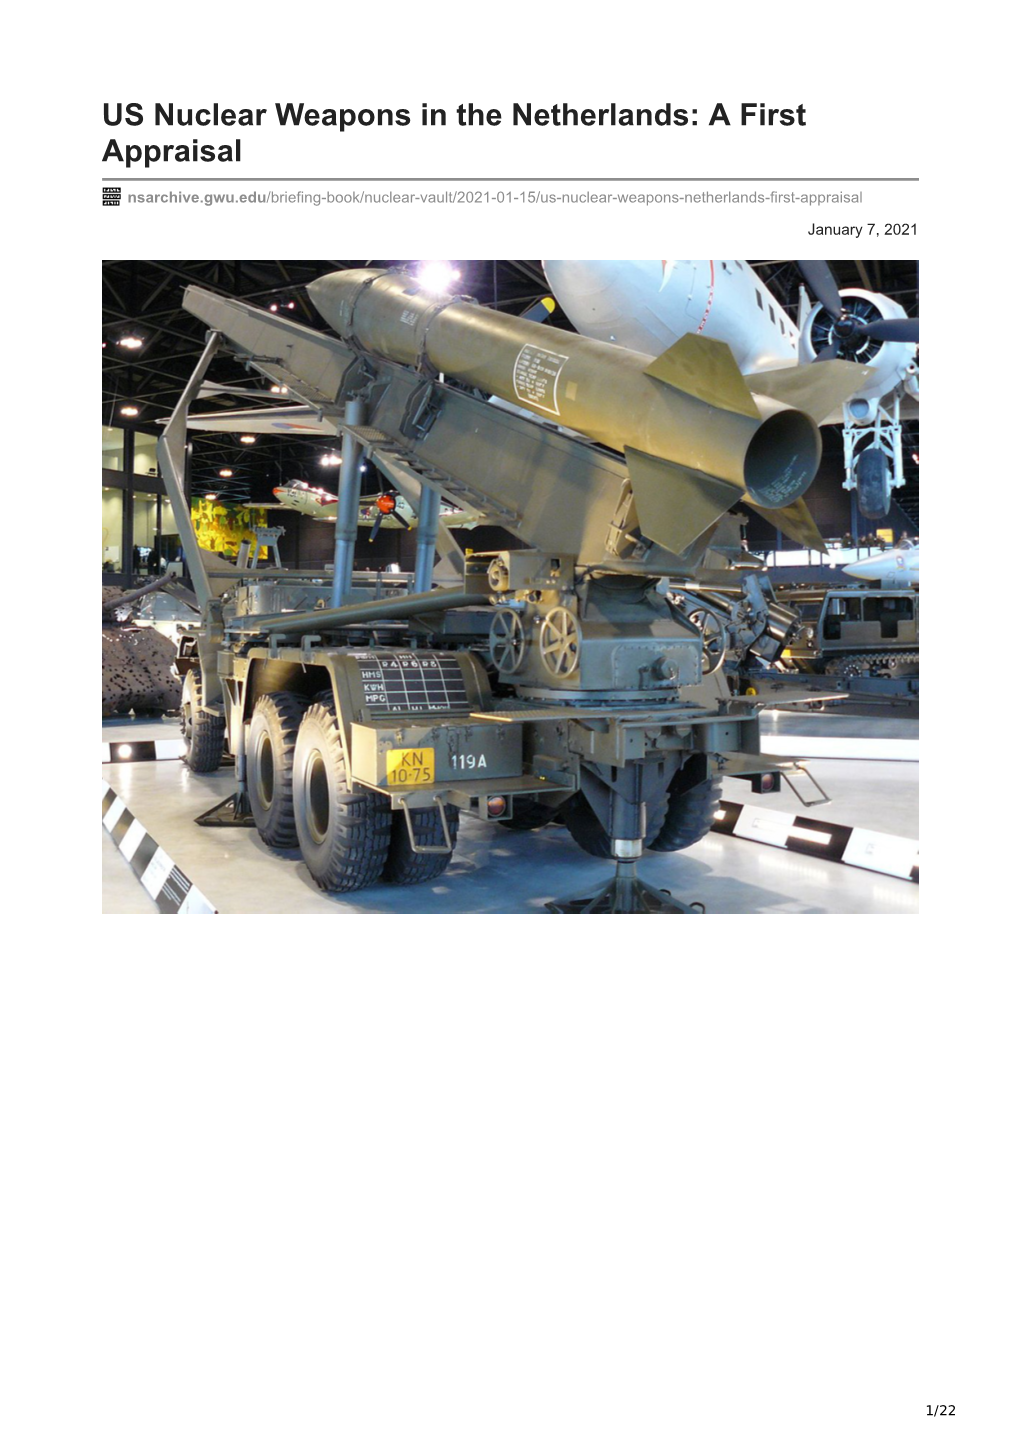 US Nuclear Weapons in the Netherlands: a First Appraisal